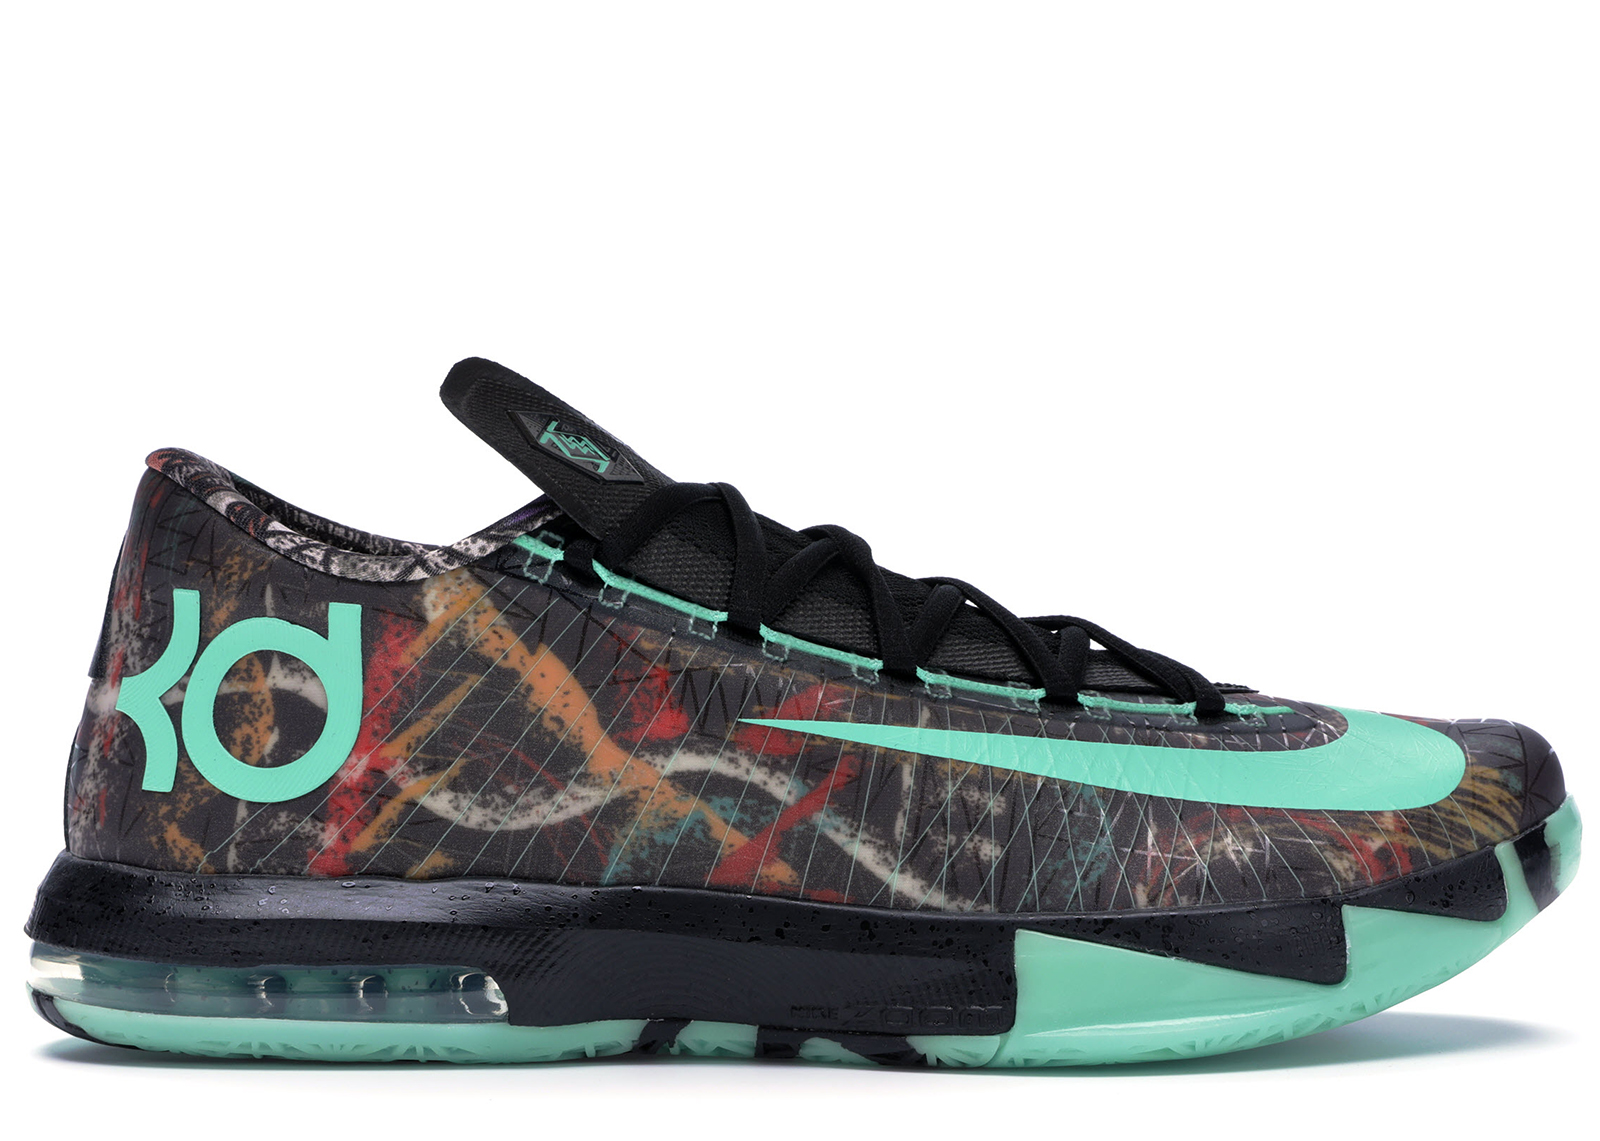 kd 6 black and white